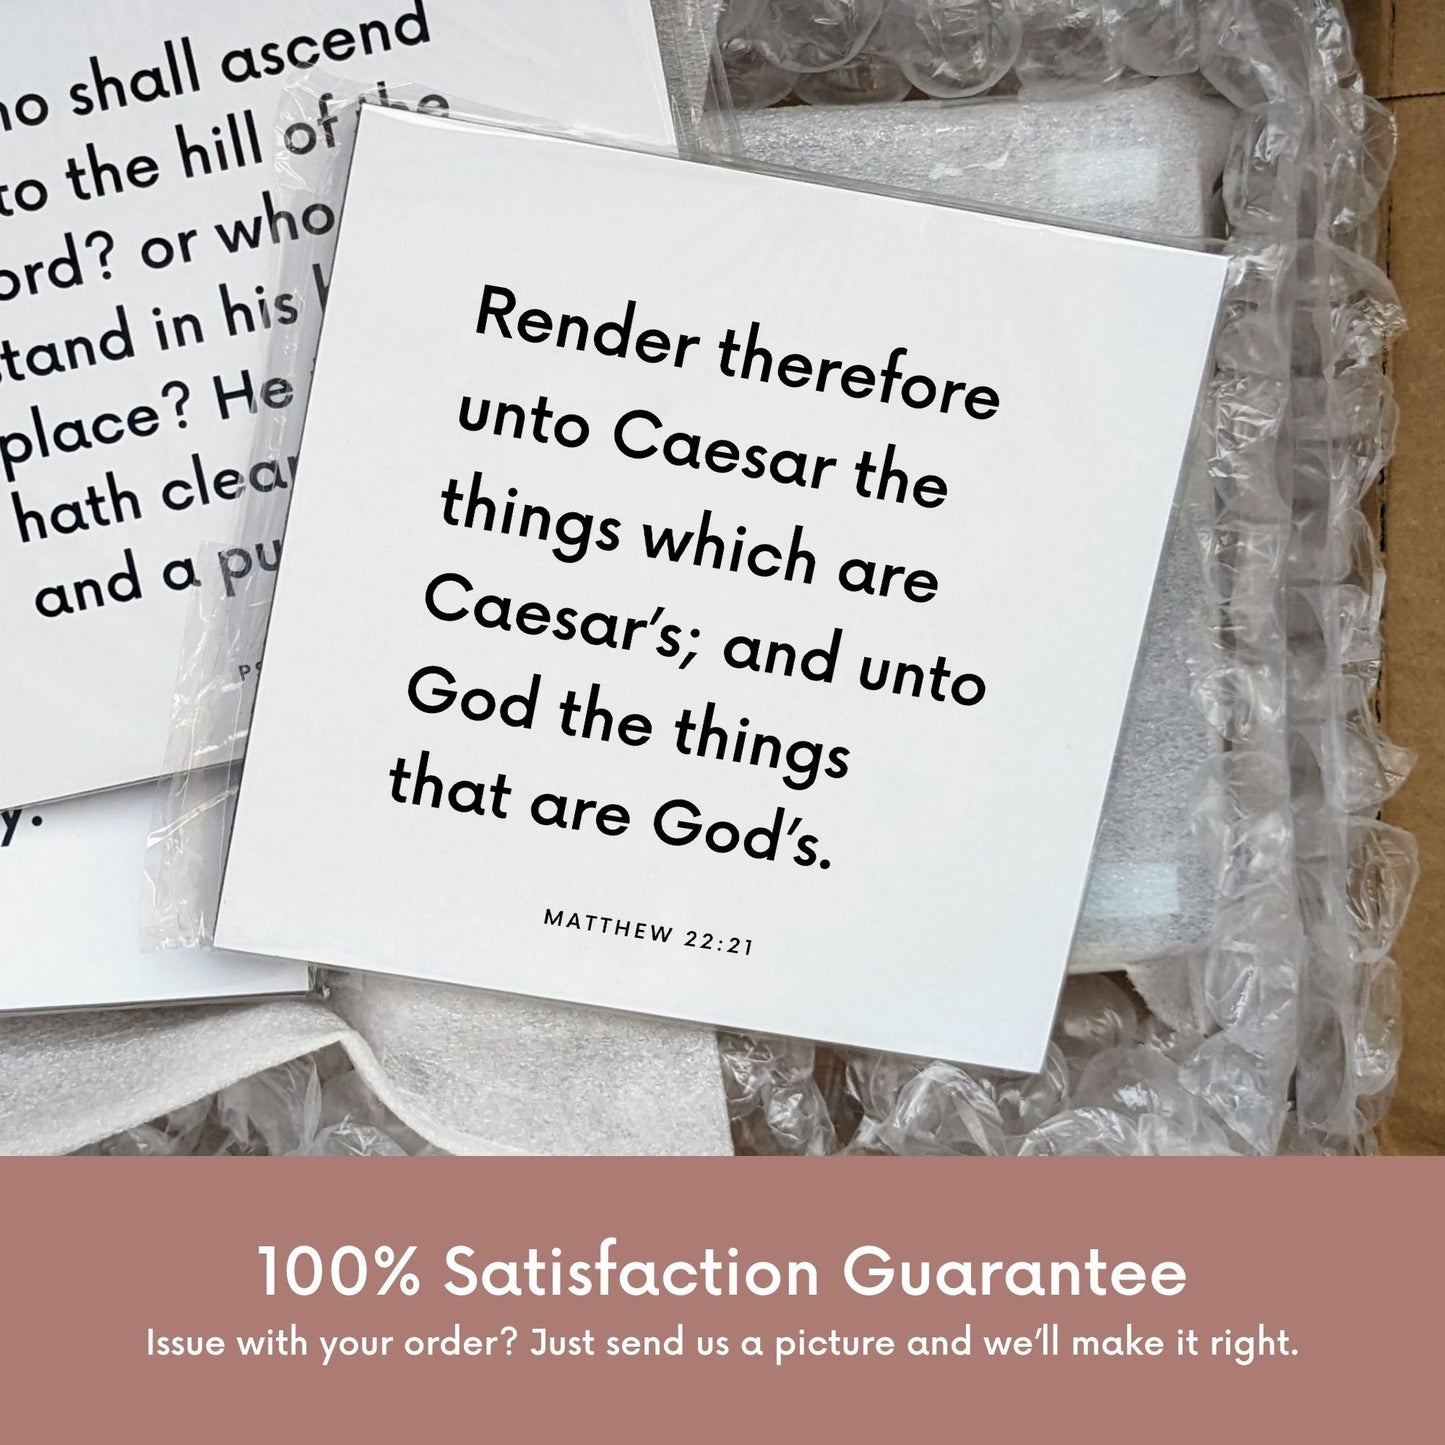 Shipping materials for scripture tile of Matthew 22:21 - "Render therefore unto Caesar the things which are Caesar’s"